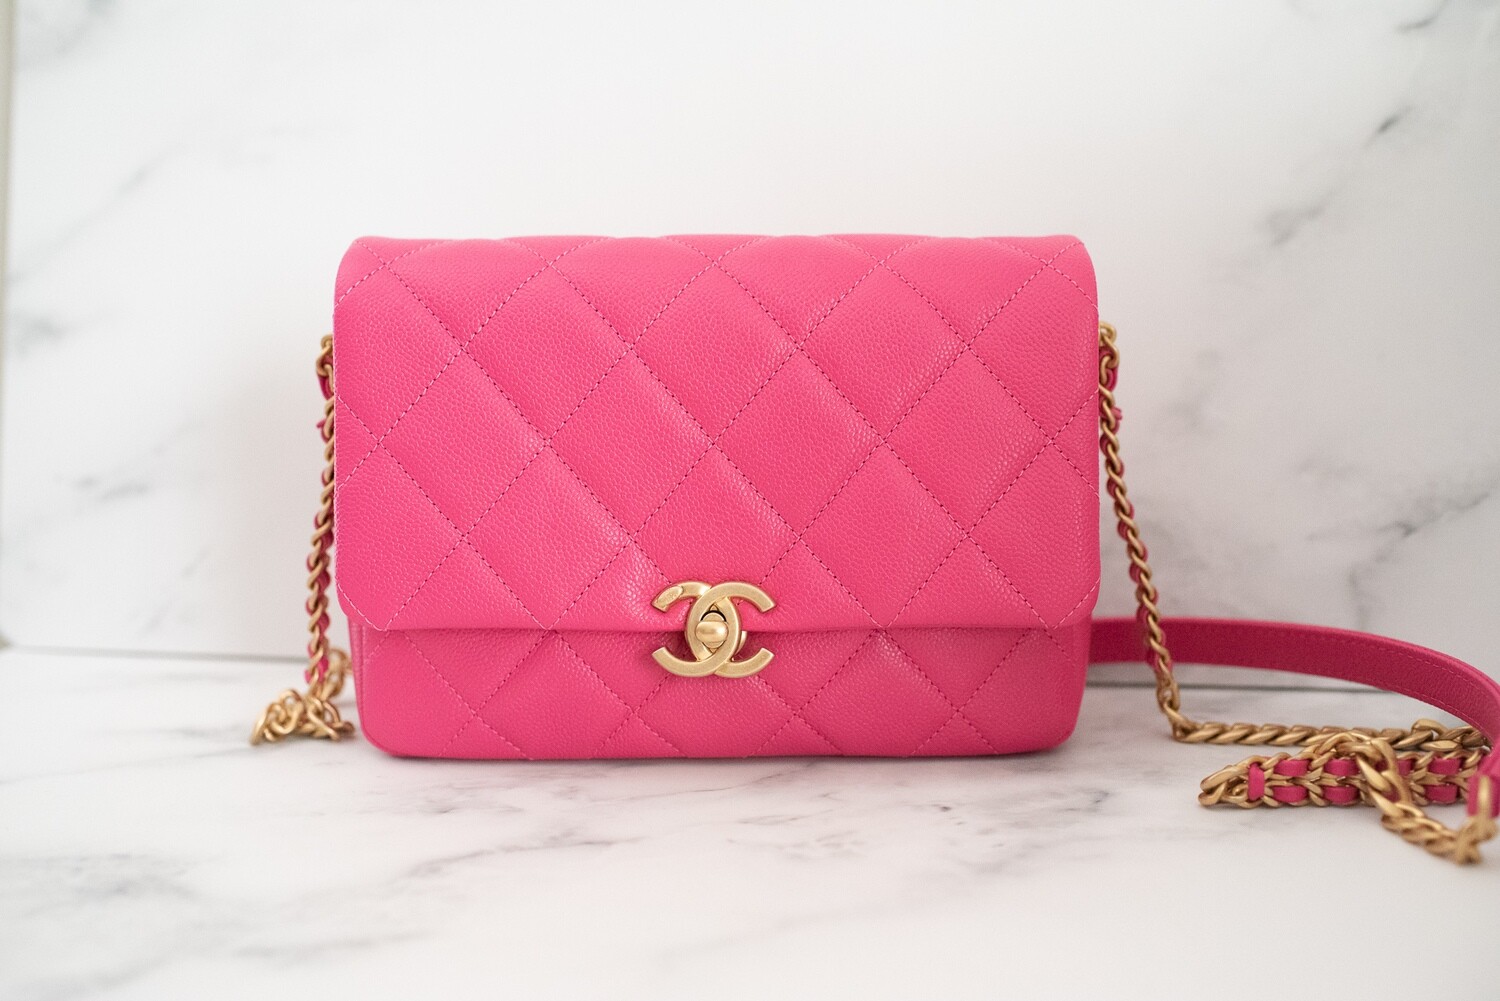 Chanel Melody Flap Small Hot Pink Caviar Leather, Brushed Gold Hardware,  New in Box WA001